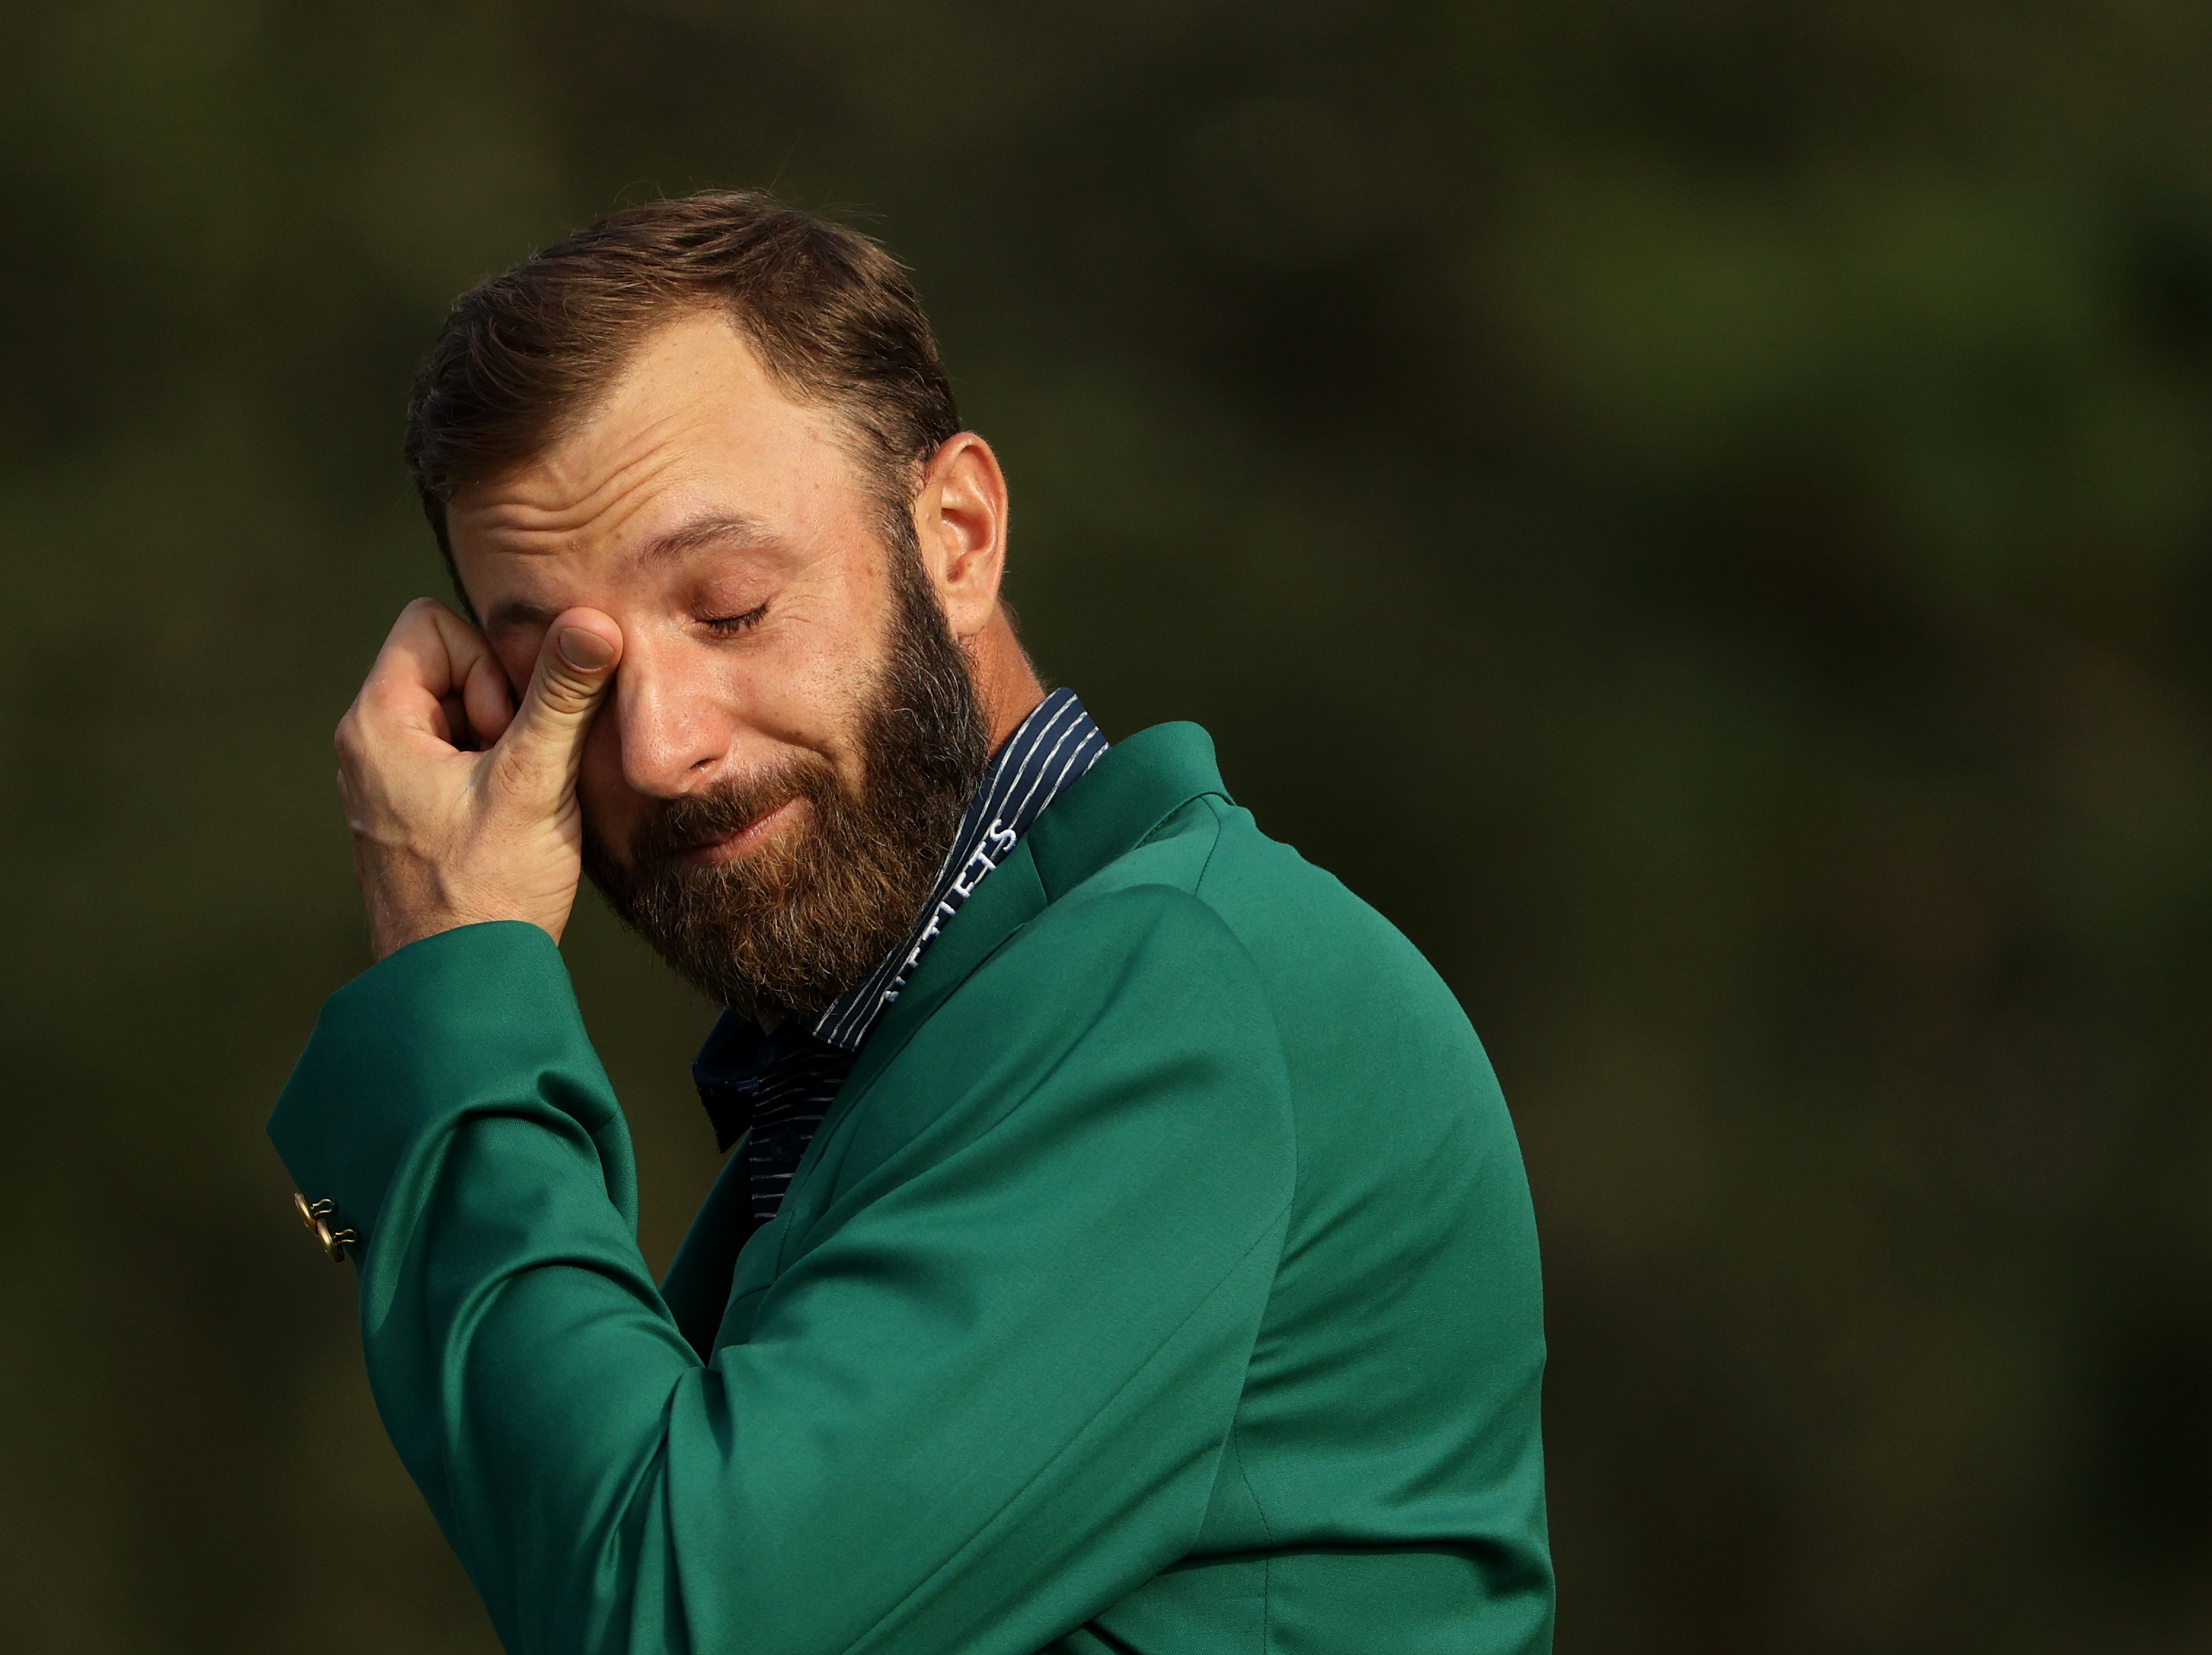 Dustin Johnson tears up during his acceptance speech